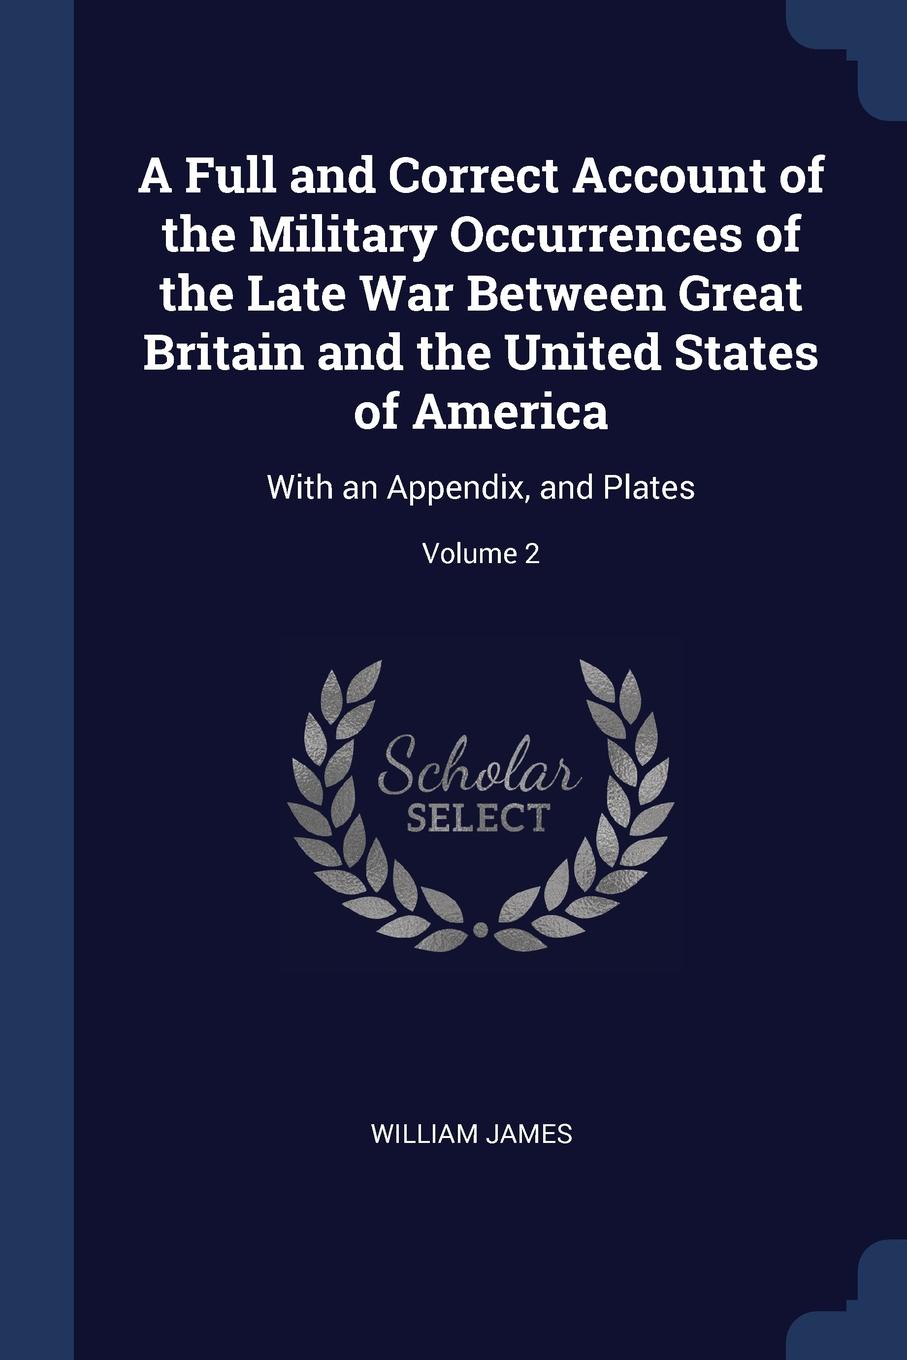 A Full and Correct Account of the Military Occurrences of the Late War Between Great Britain and the United States of America. With an Appendix, and Plates; Volume 2